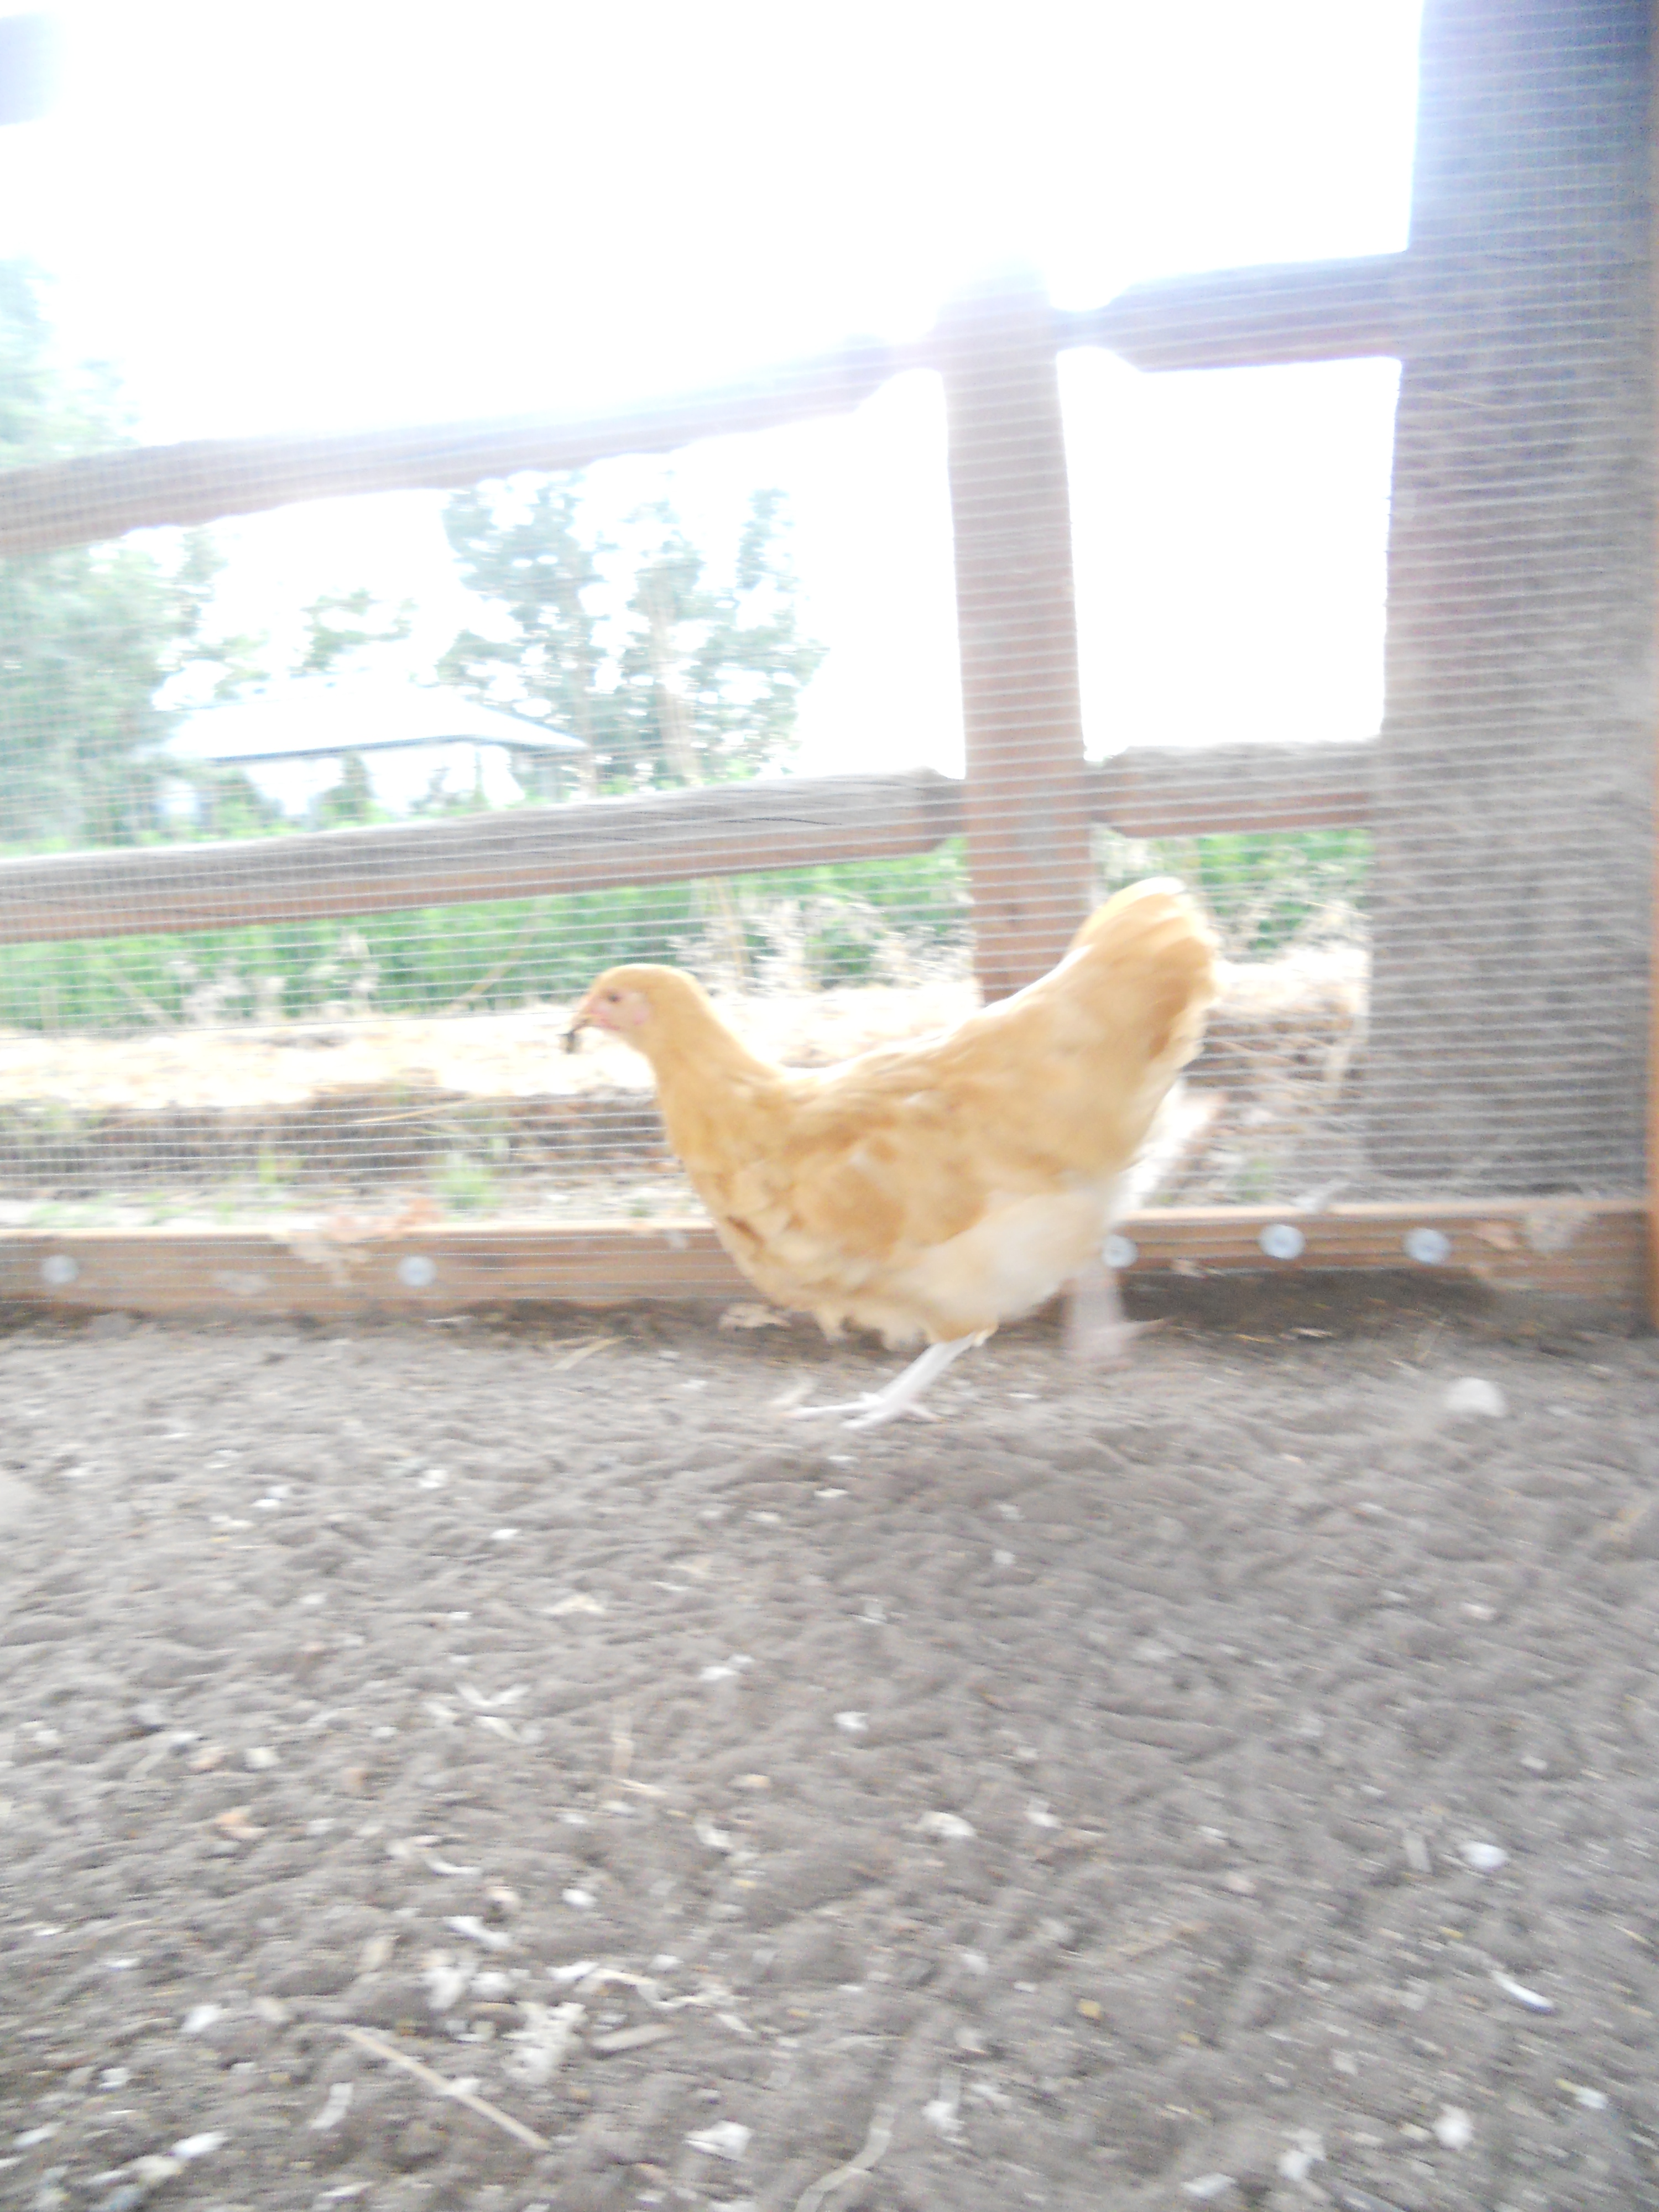 This is Scratch. You can't see all the other girls chasing after her but Scratch found a June bug & as soon as she did she took off running, trying to escape all the other girls from taking away her special  treat. Chickens are so silly.
What do your chickens like to get/eat to run and try to hide so they can have it all?